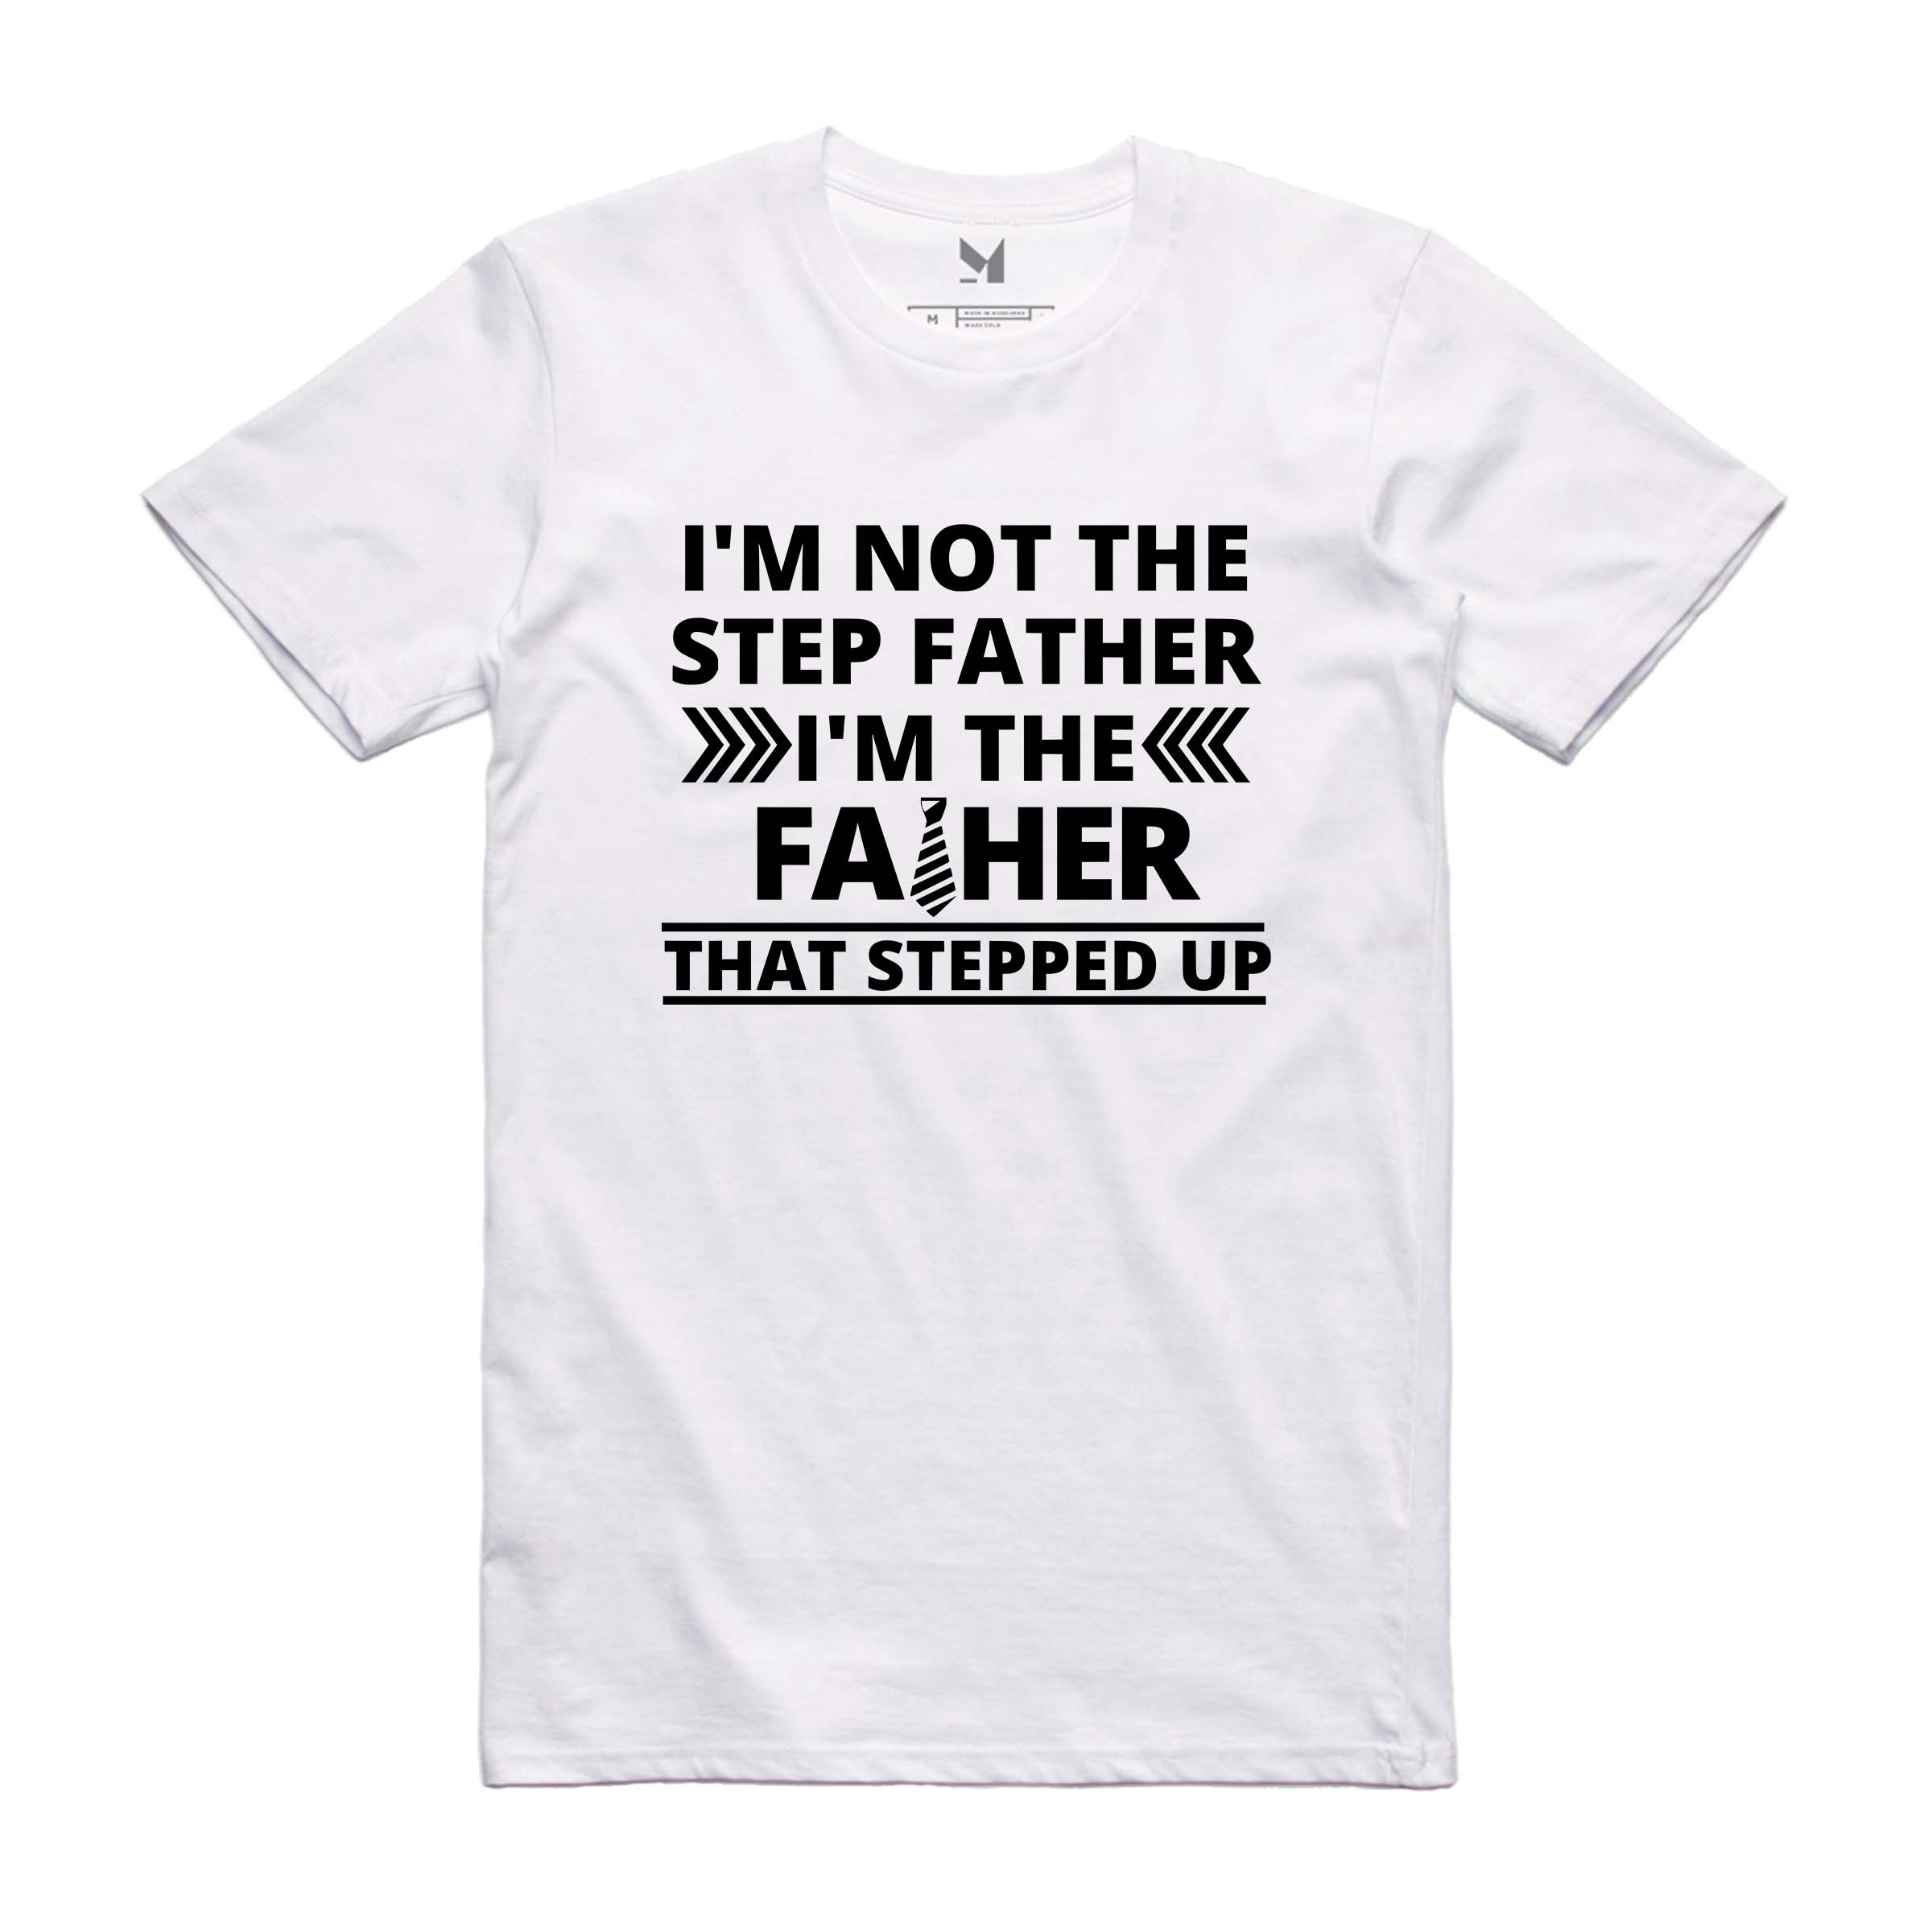 I'M NOT A STEP FATHER TSHIRT A002